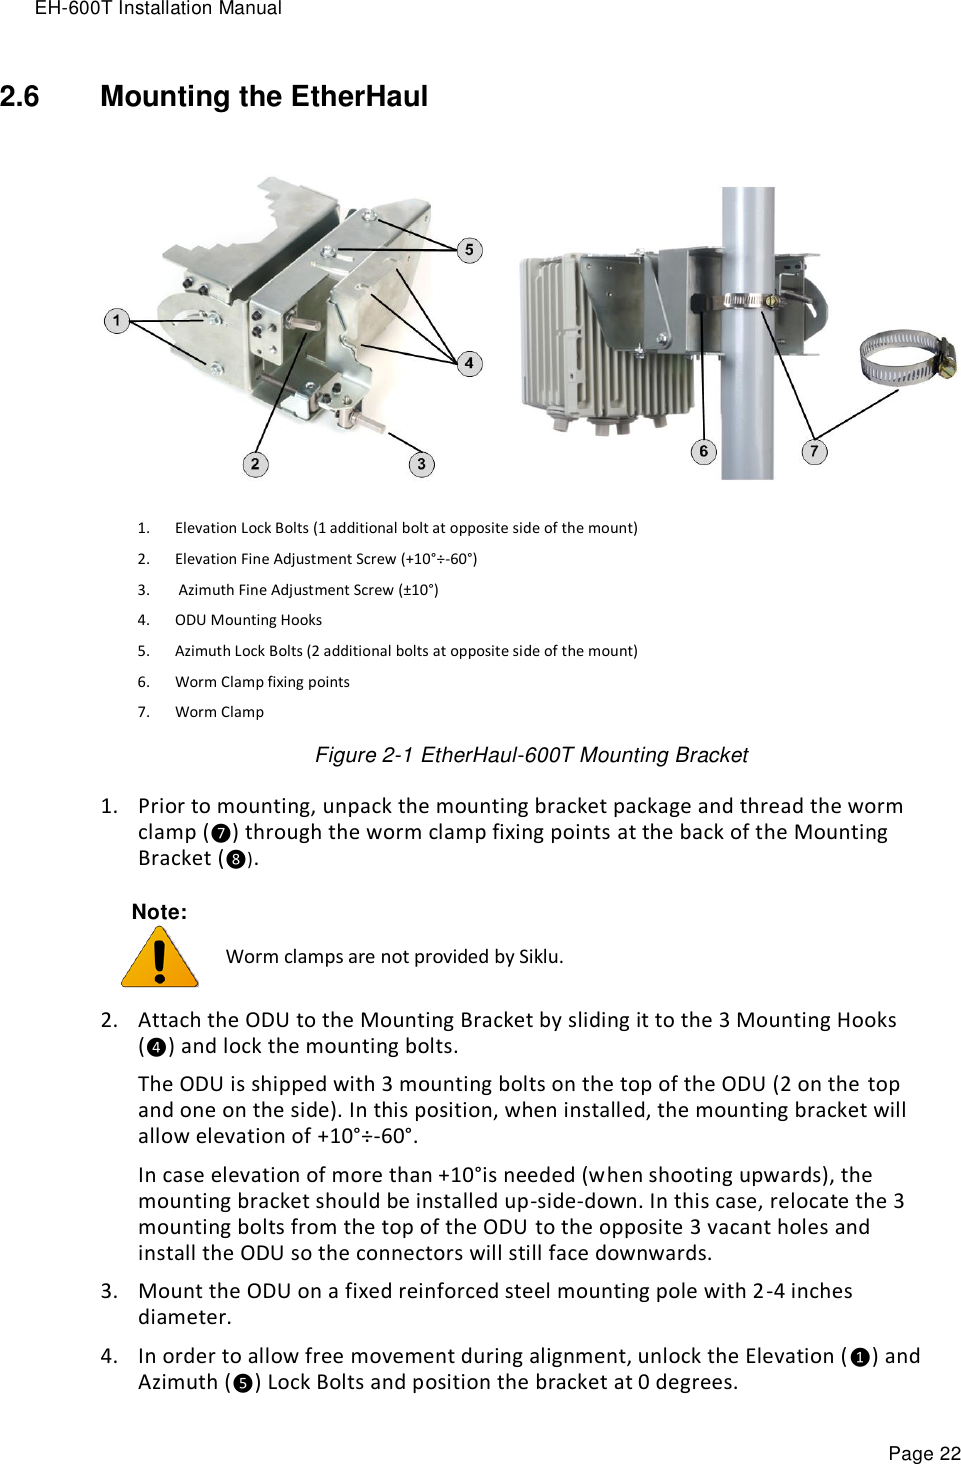 EH-600T Installation Manual Page 22 2.6  Mounting the EtherHaul   1. Elevation Lock Bolts (1 additional bolt at opposite side of the mount) 2. Elevation Fine Adjustment Screw (+10°÷-60°)  3.  Azimuth Fine Adjustment Screw (±10°)  4. ODU Mounting Hooks 5. Azimuth Lock Bolts (2 additional bolts at opposite side of the mount) 6. Worm Clamp fixing points 7. Worm Clamp Figure 2-1 EtherHaul-600T Mounting Bracket 1. Prior to mounting, unpack the mounting bracket package and thread the worm clamp (❼) through the worm clamp fixing points at the back of the Mounting Bracket (❽). Note:   Worm clamps are not provided by Siklu. 2. Attach the ODU to the Mounting Bracket by sliding it to the 3 Mounting Hooks (❹) and lock the mounting bolts. The ODU is shipped with 3 mounting bolts on the top of the ODU (2 on the top and one on the side). In this position, when installed, the mounting bracket will allow elevation of +10°÷-60°.  In case elevation of more than +10°is needed (when shooting upwards), the mounting bracket should be installed up-side-down. In this case, relocate the 3 mounting bolts from the top of the ODU to the opposite 3 vacant holes and install the ODU so the connectors will still face downwards. 3. Mount the ODU on a fixed reinforced steel mounting pole with 2-4 inches diameter. 4. In order to allow free movement during alignment, unlock the Elevation (❶) and Azimuth (❺) Lock Bolts and position the bracket at 0 degrees. 